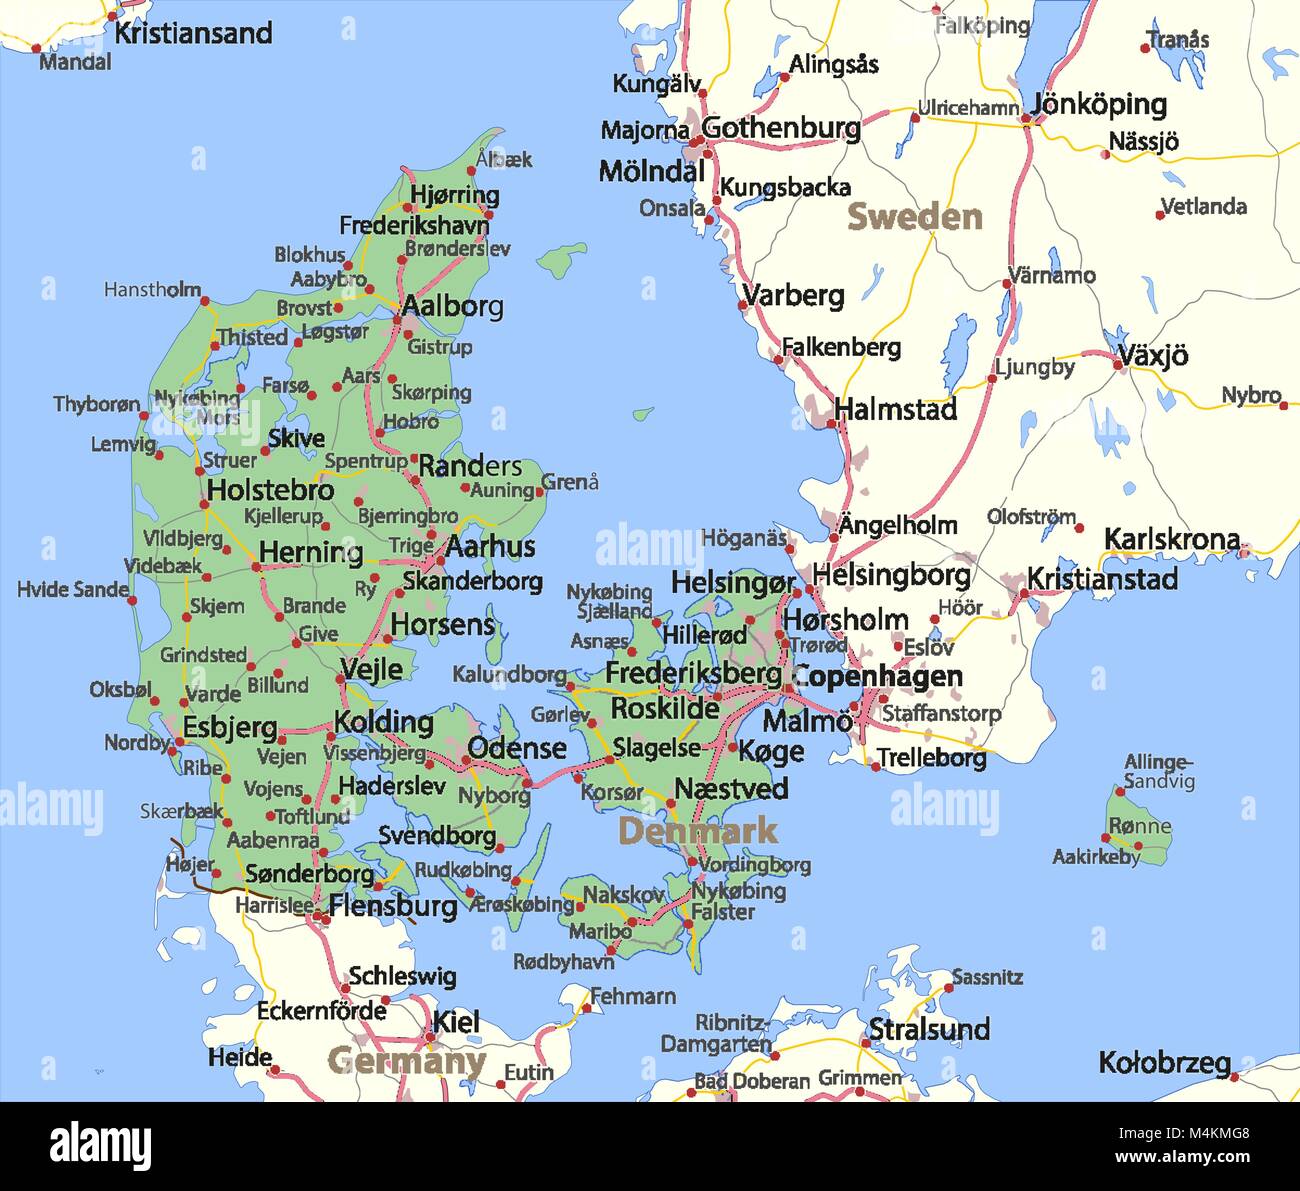 Map of Denmark. Shows country borders, urban areas, place names and